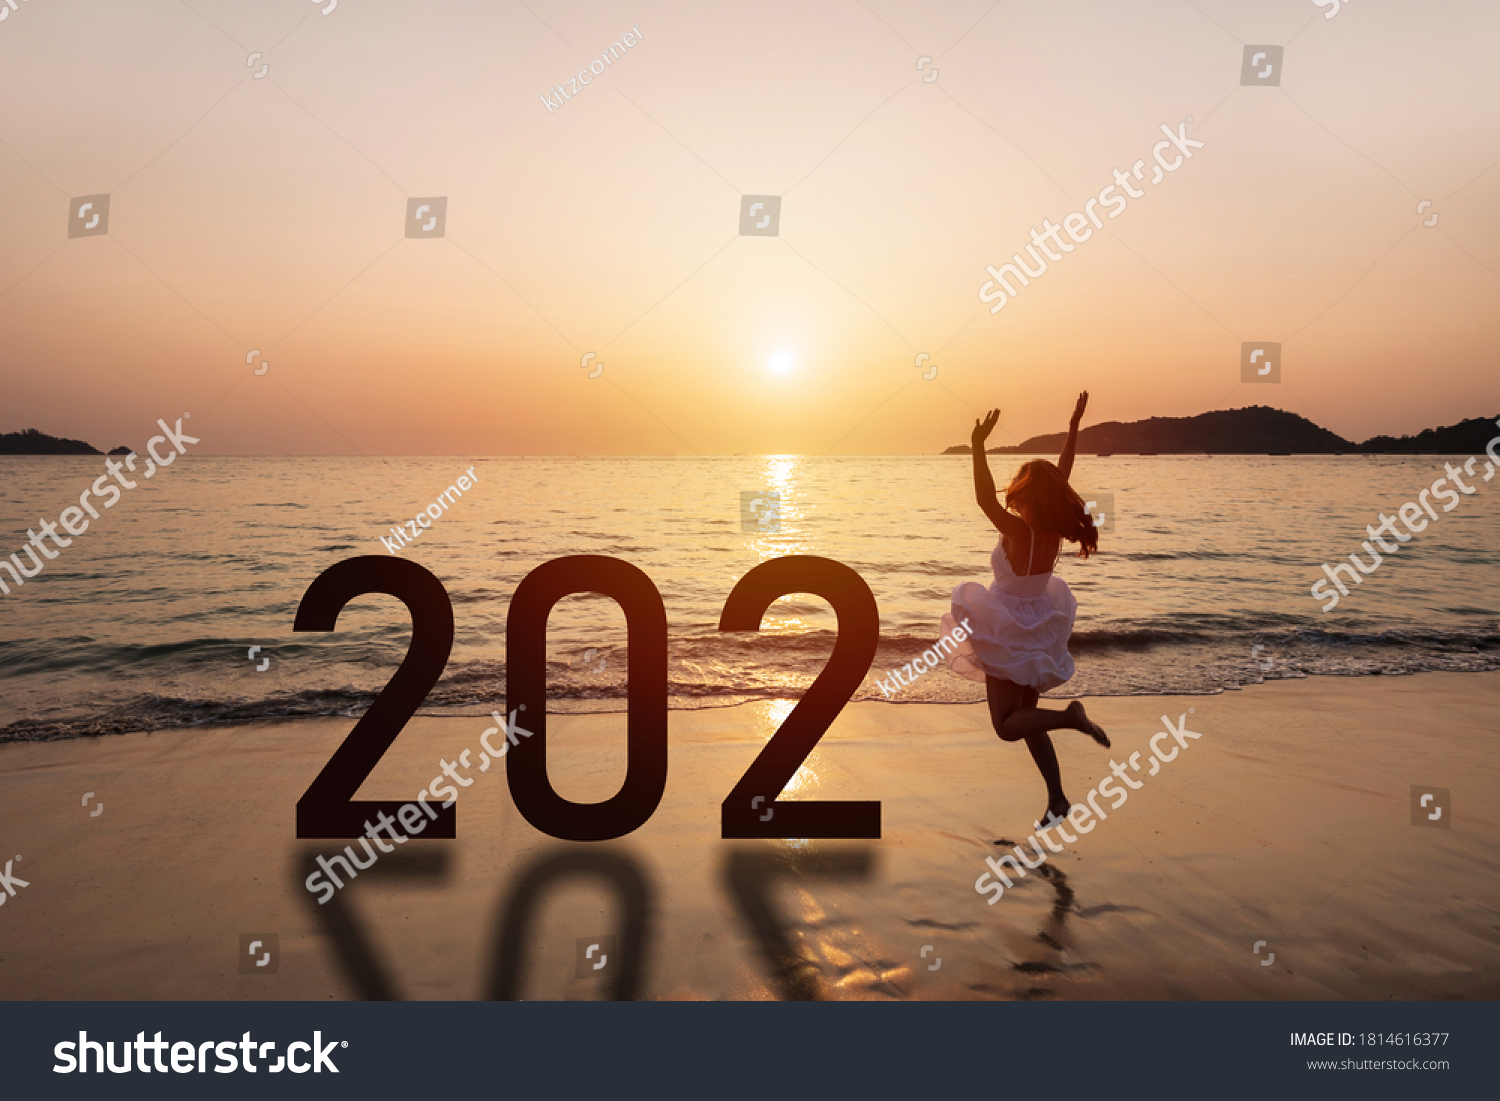 Young woman traveler jumping at the beach celebrating New Year 2021 at sunset #1814616377